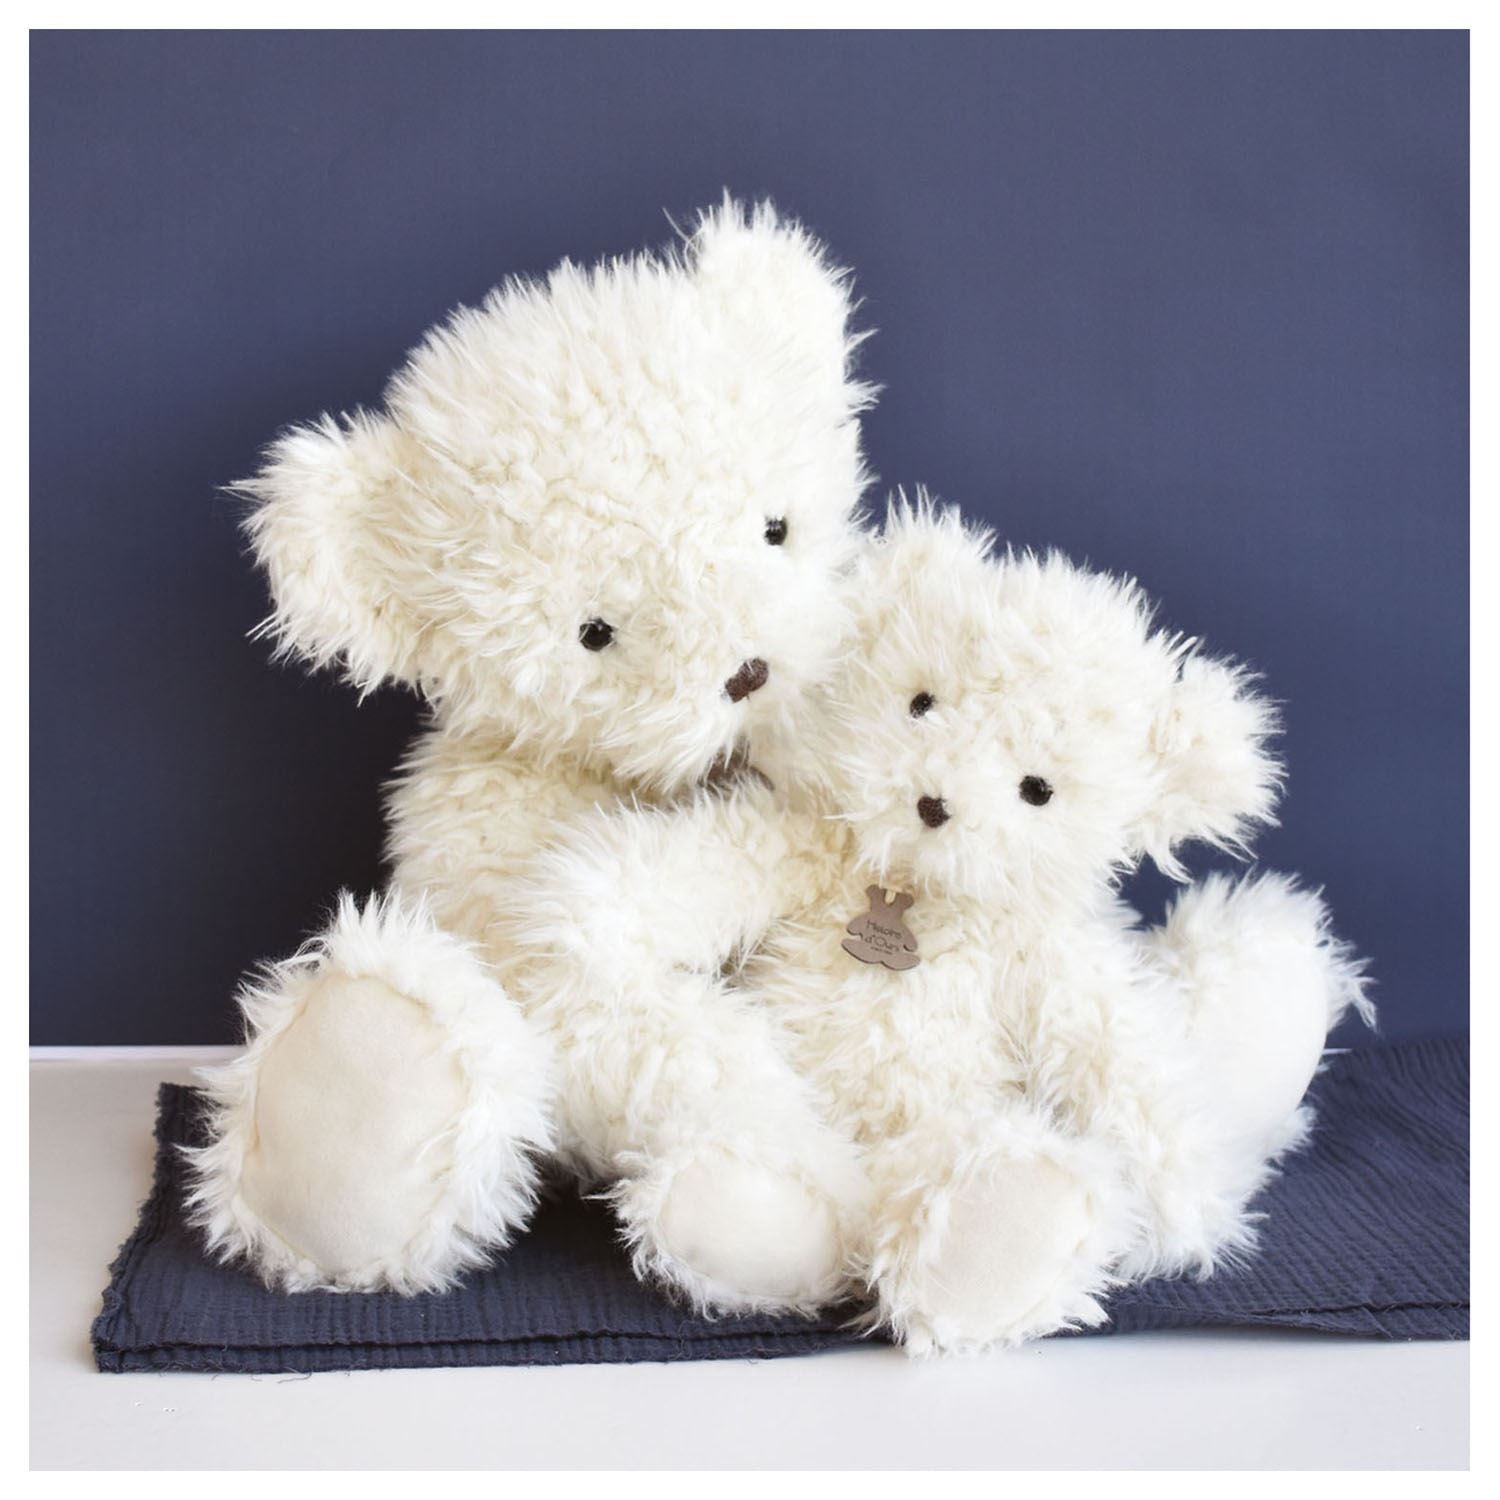 Histoire D'ours The Teddy: Vanilla – Hotaling